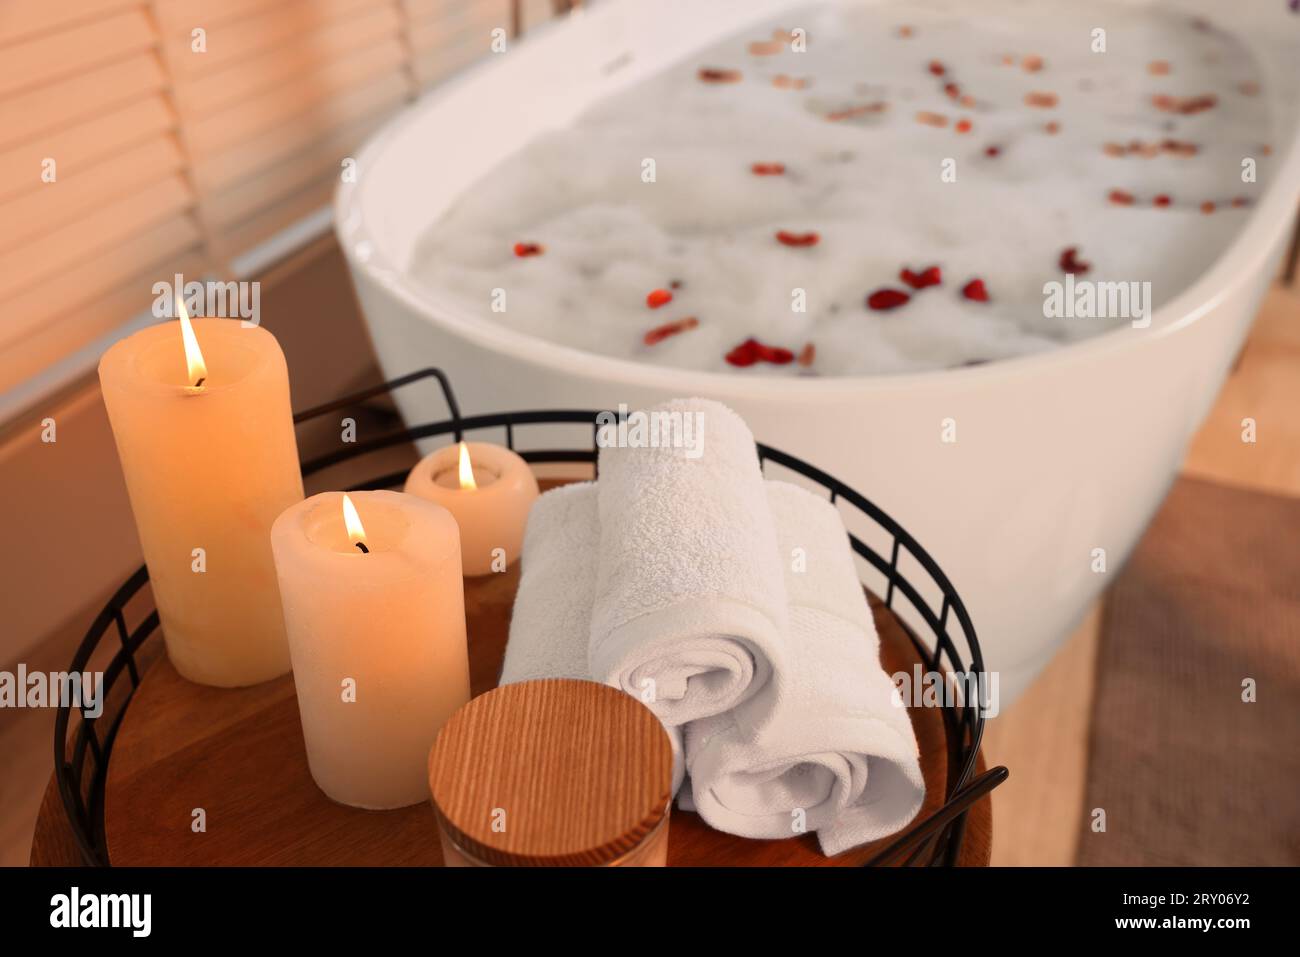 Man relaxing in bathtub with lighted candles arround stock photo